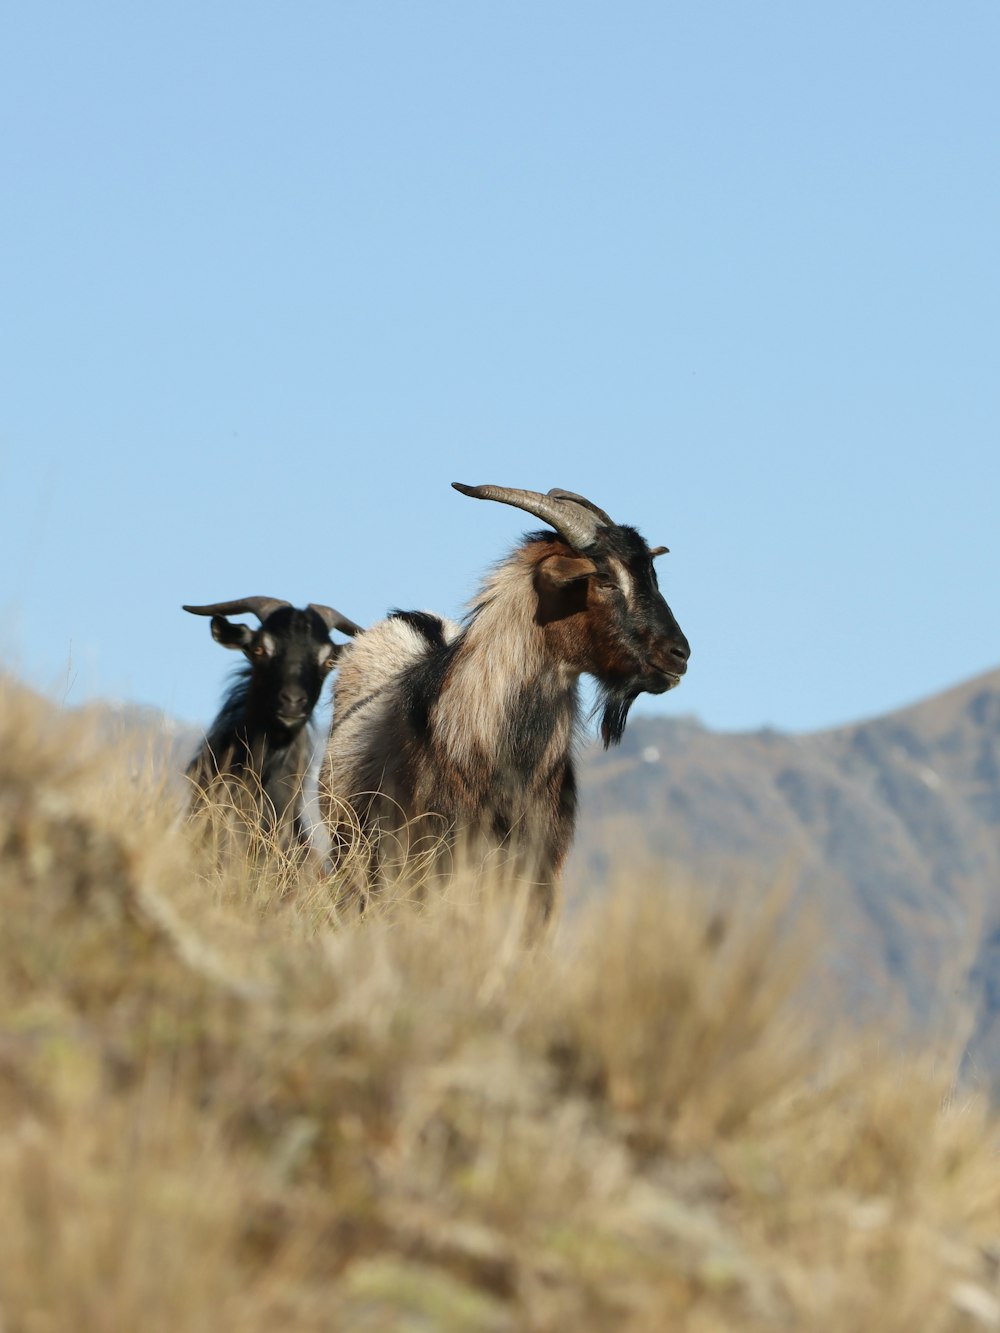 two goats standing in a field with mountains in the background